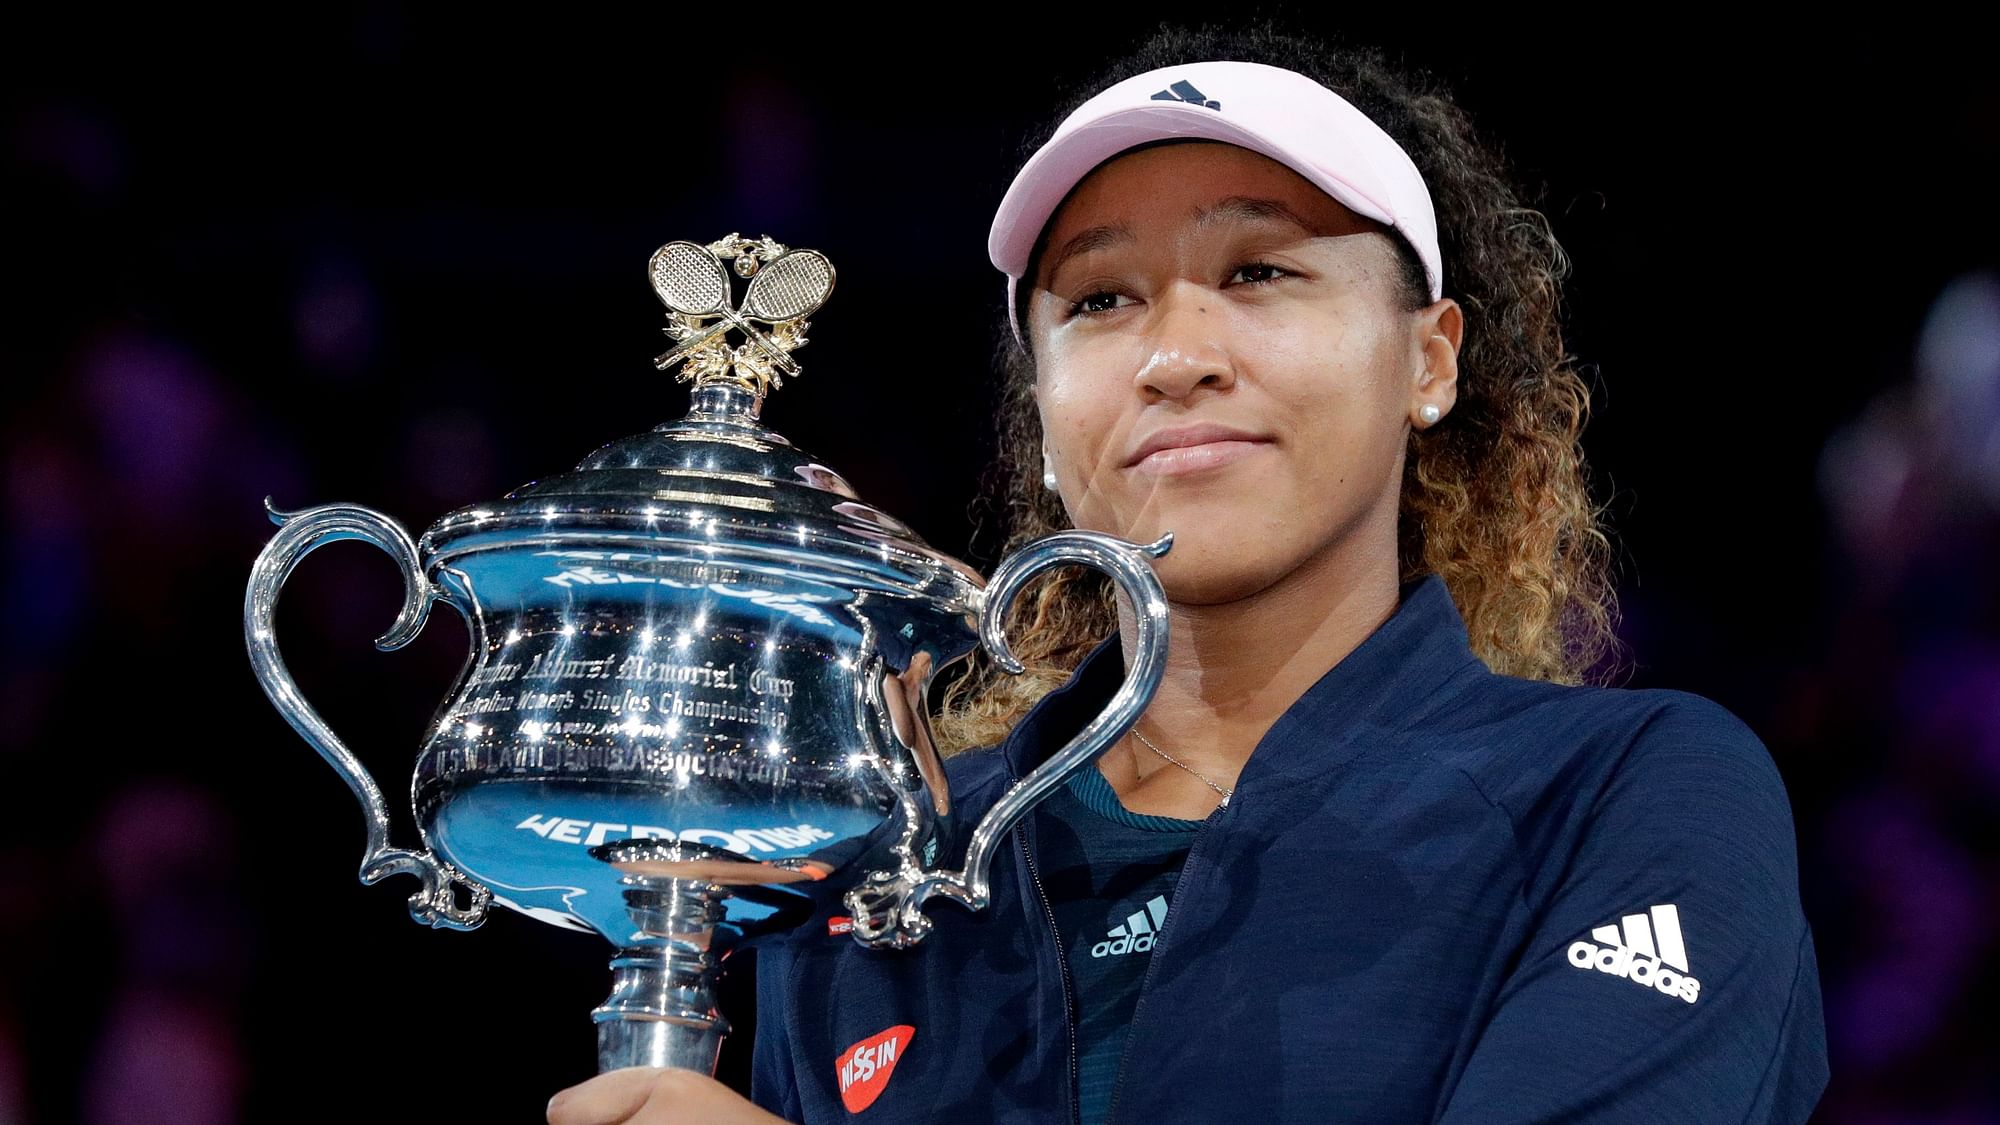 Naomi Osaka became the first tennis player from Japan to reach No. 1 in the rankings.